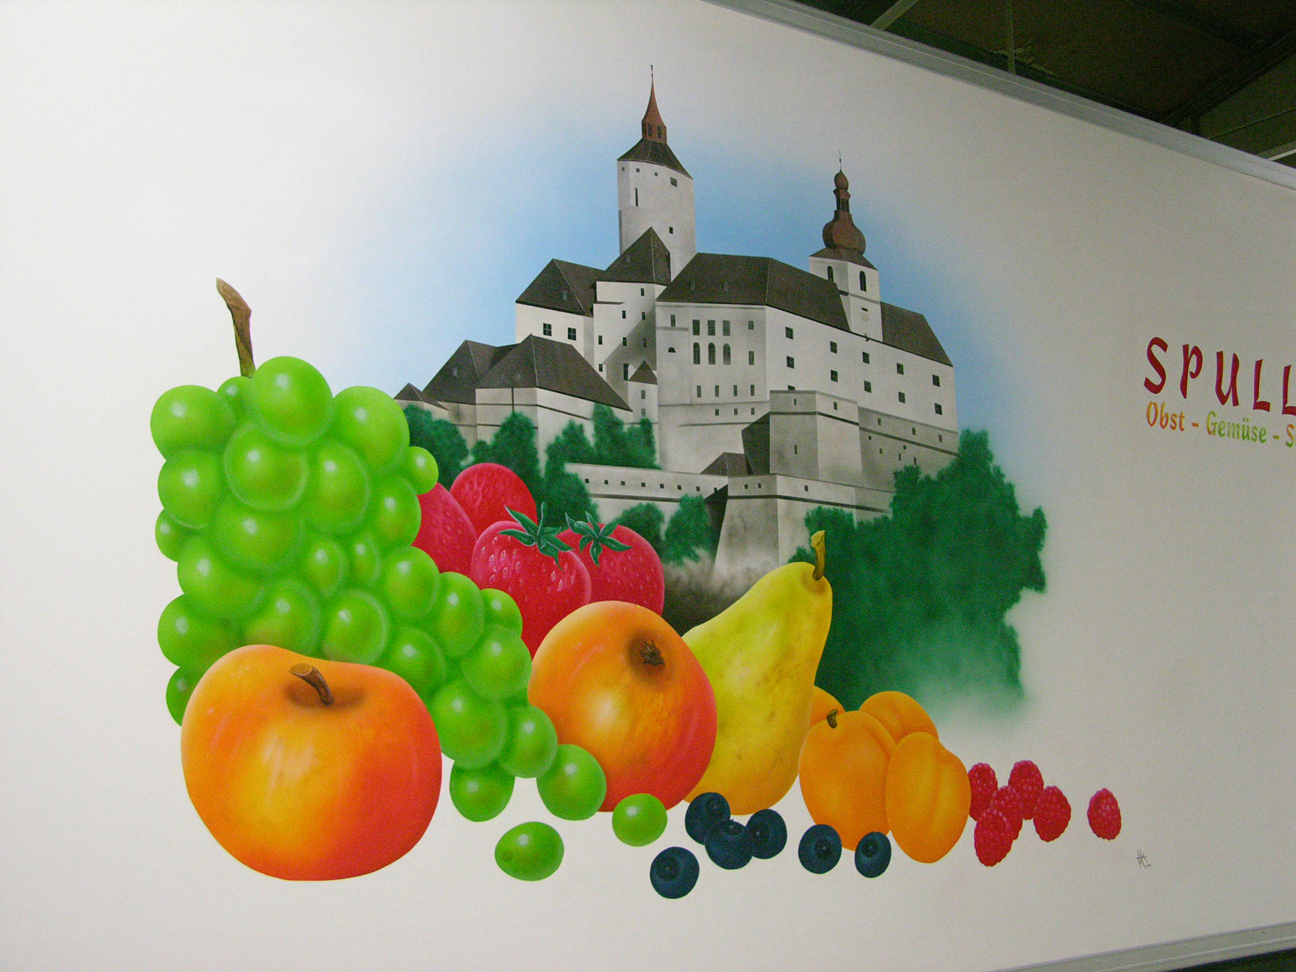 [AA02.02   Fa. Spuller - Forchtenstein.jpg] - Click here to view the image in full size.